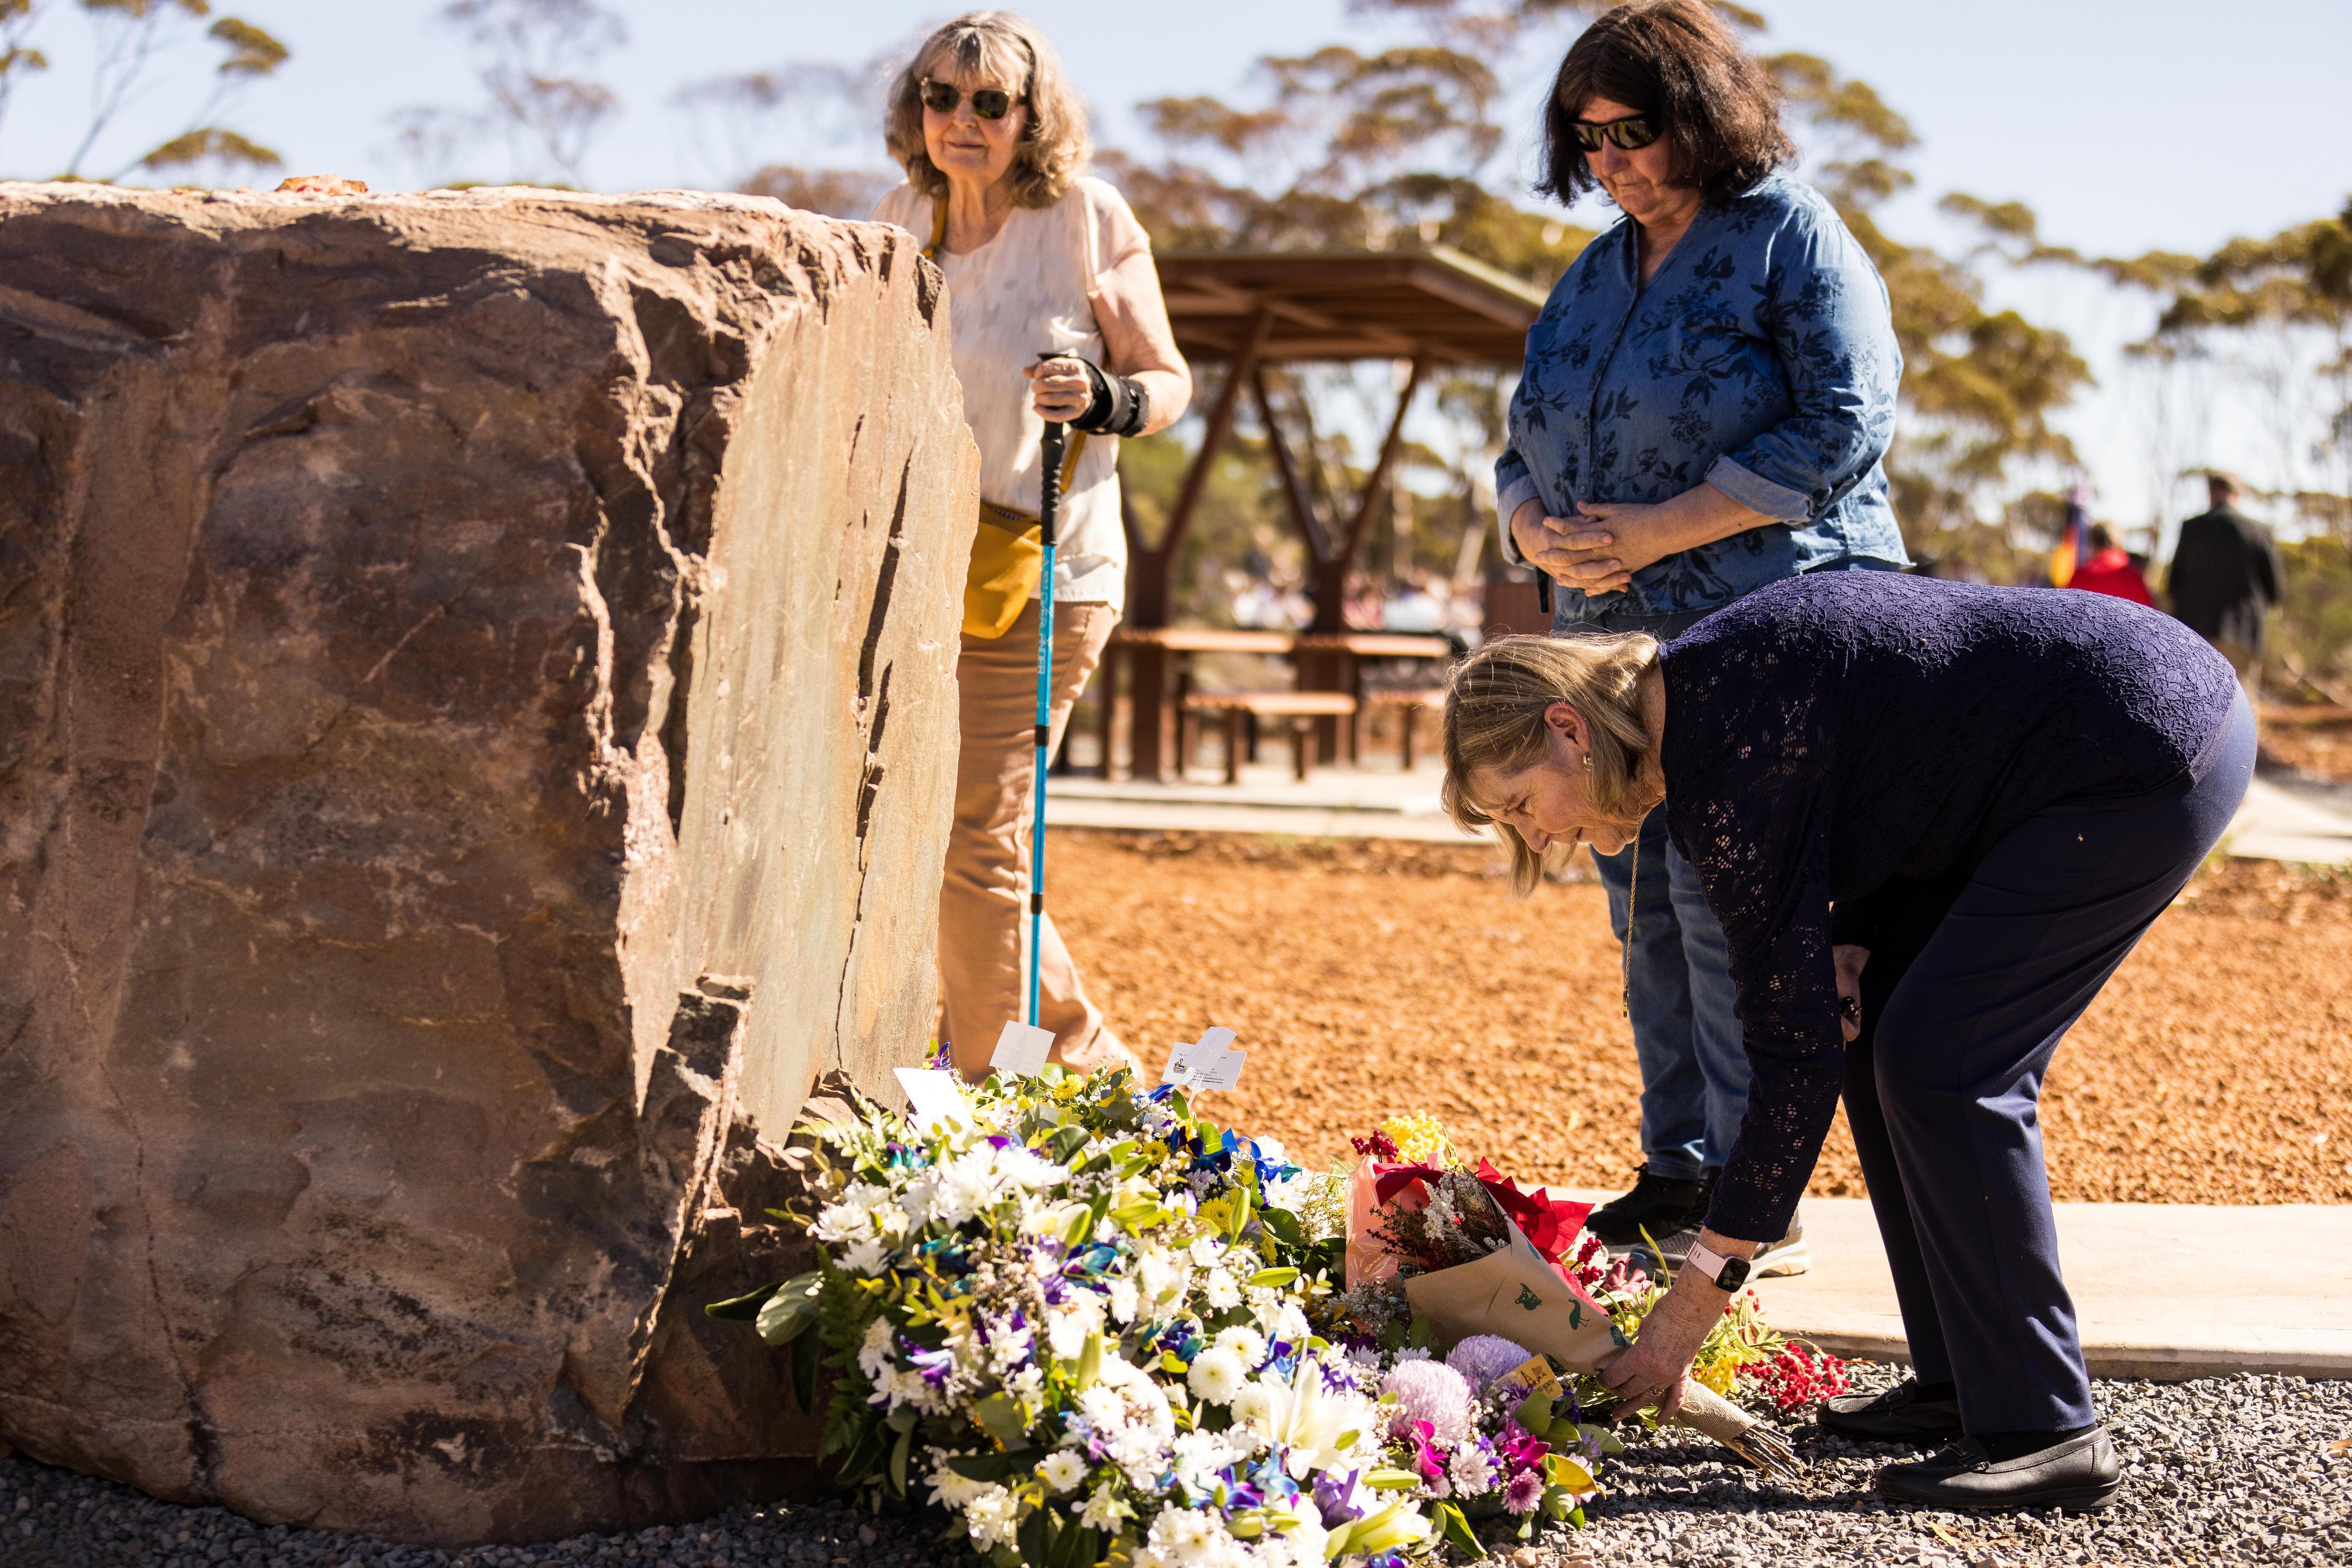 A woman lays flowers at a memorial while two other women look on.  